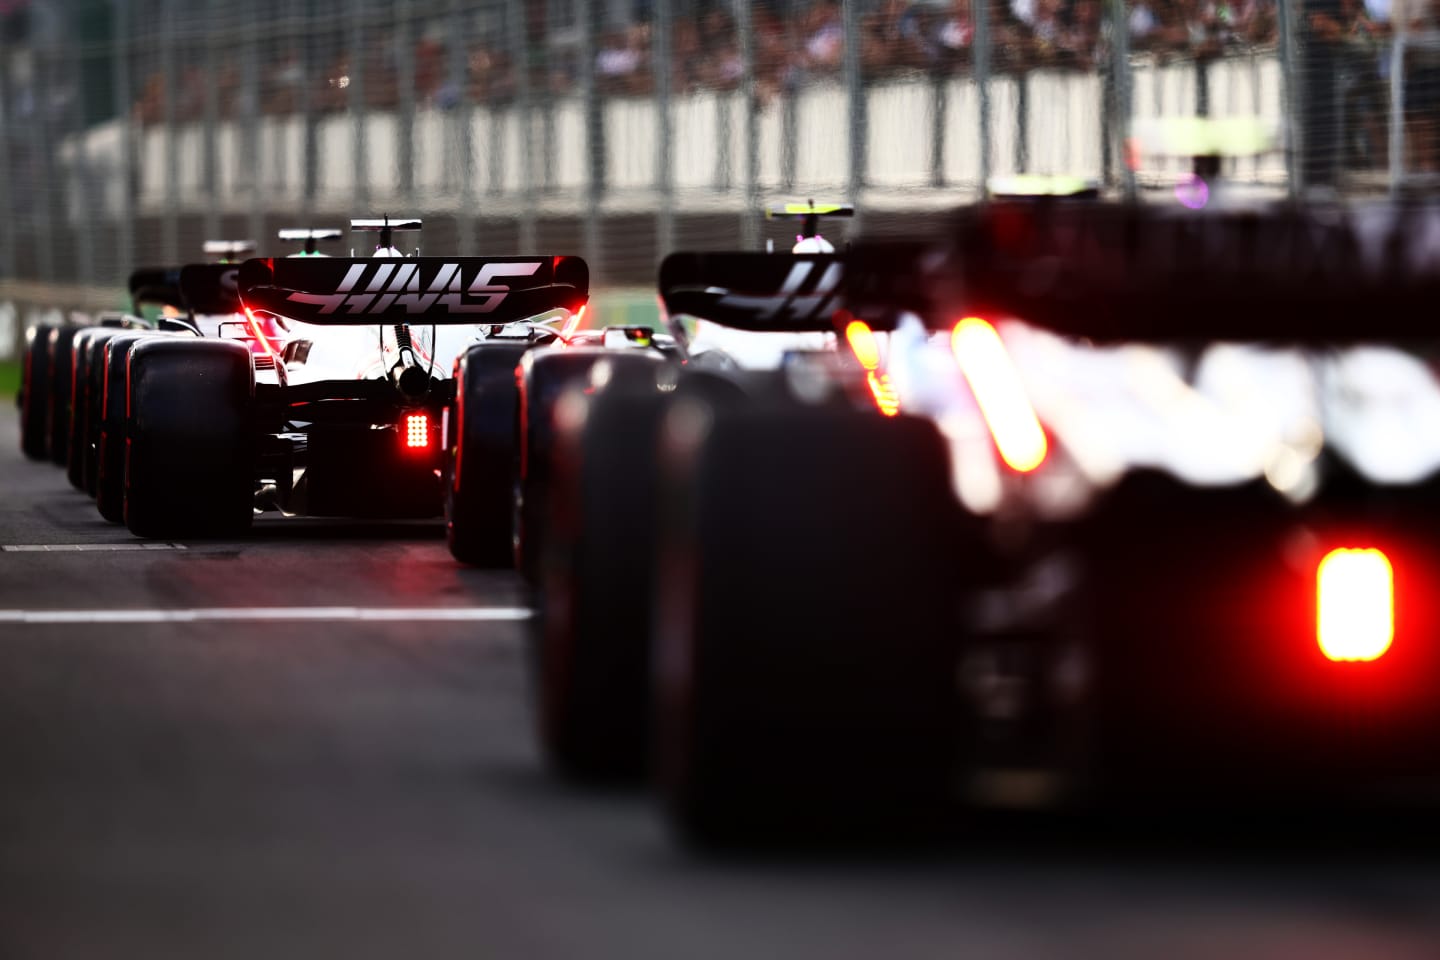 MELBOURNE, AUSTRALIA - APRIL 09: A general view as the cars line up in the Pitlane during